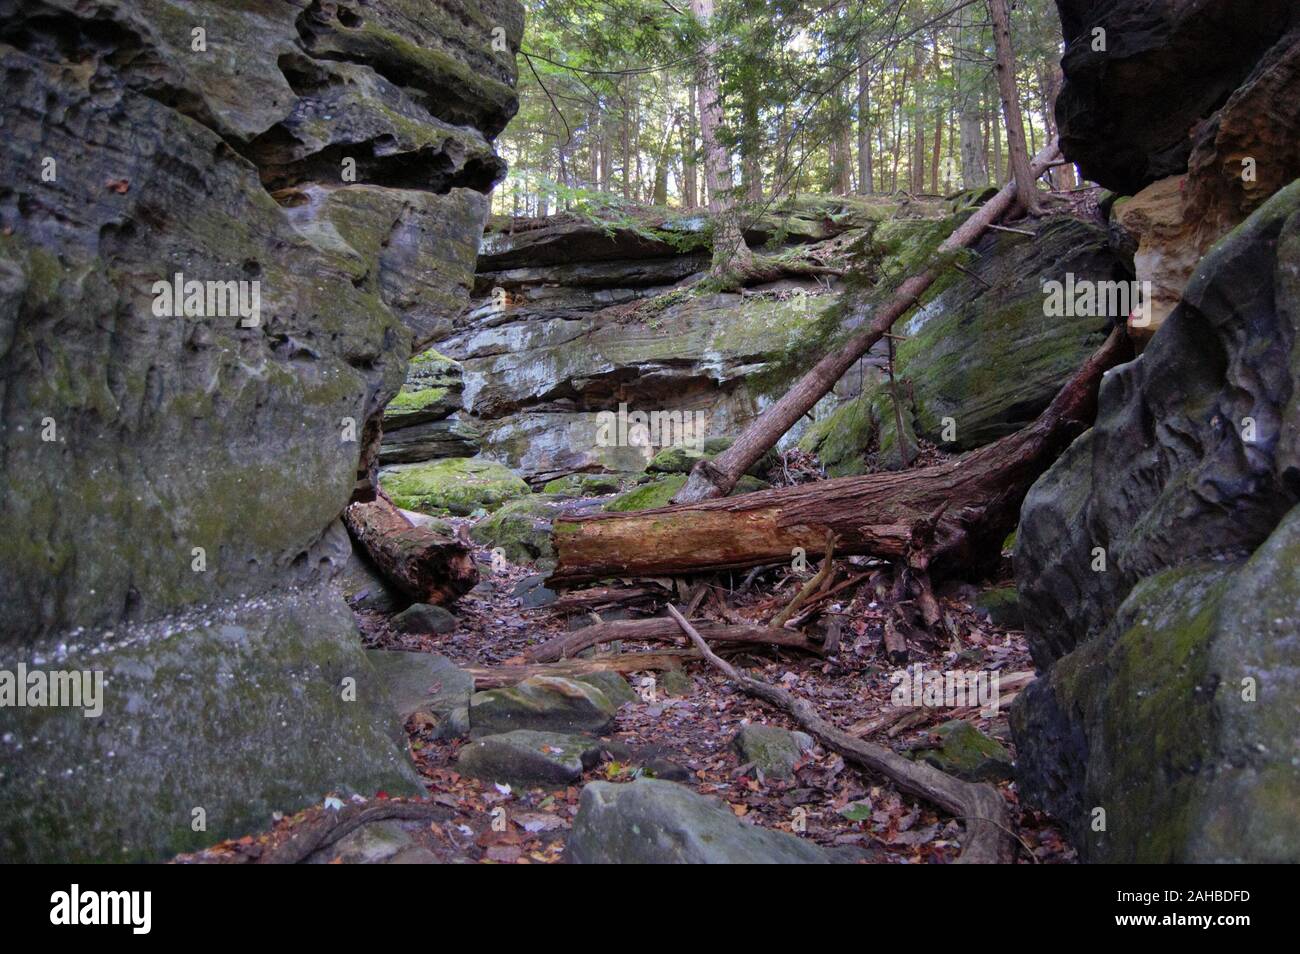 Rocks with logs and branches Stock Photo